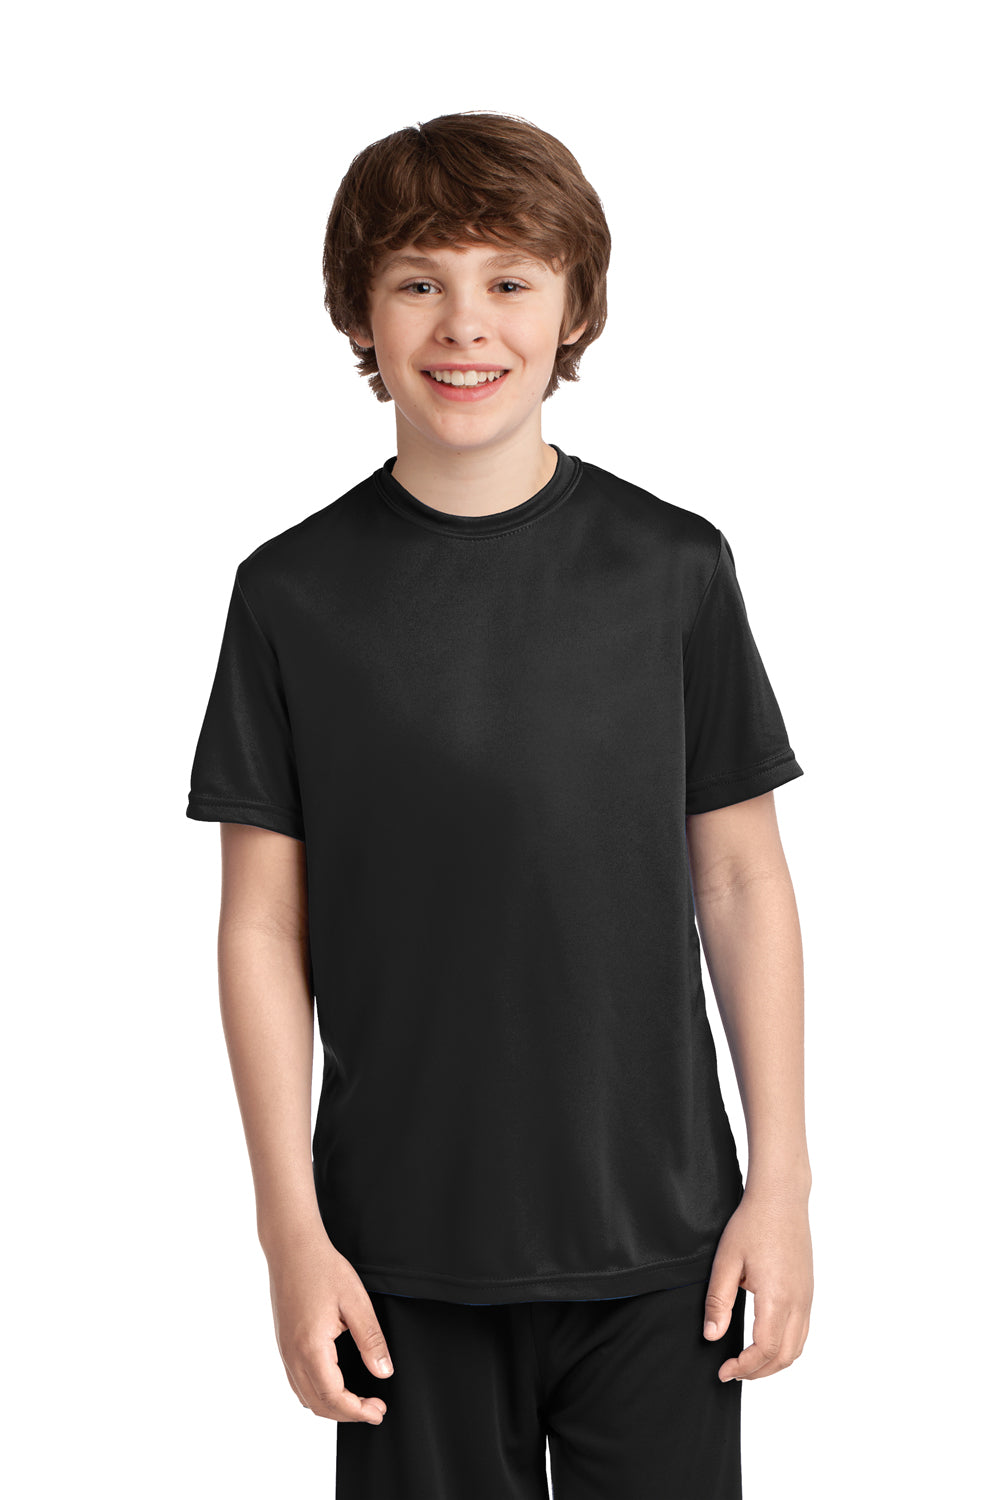 Port & Company PC380Y Youth Dry Zone Performance Moisture Wicking Short Sleeve Crewneck T-Shirt Black Front